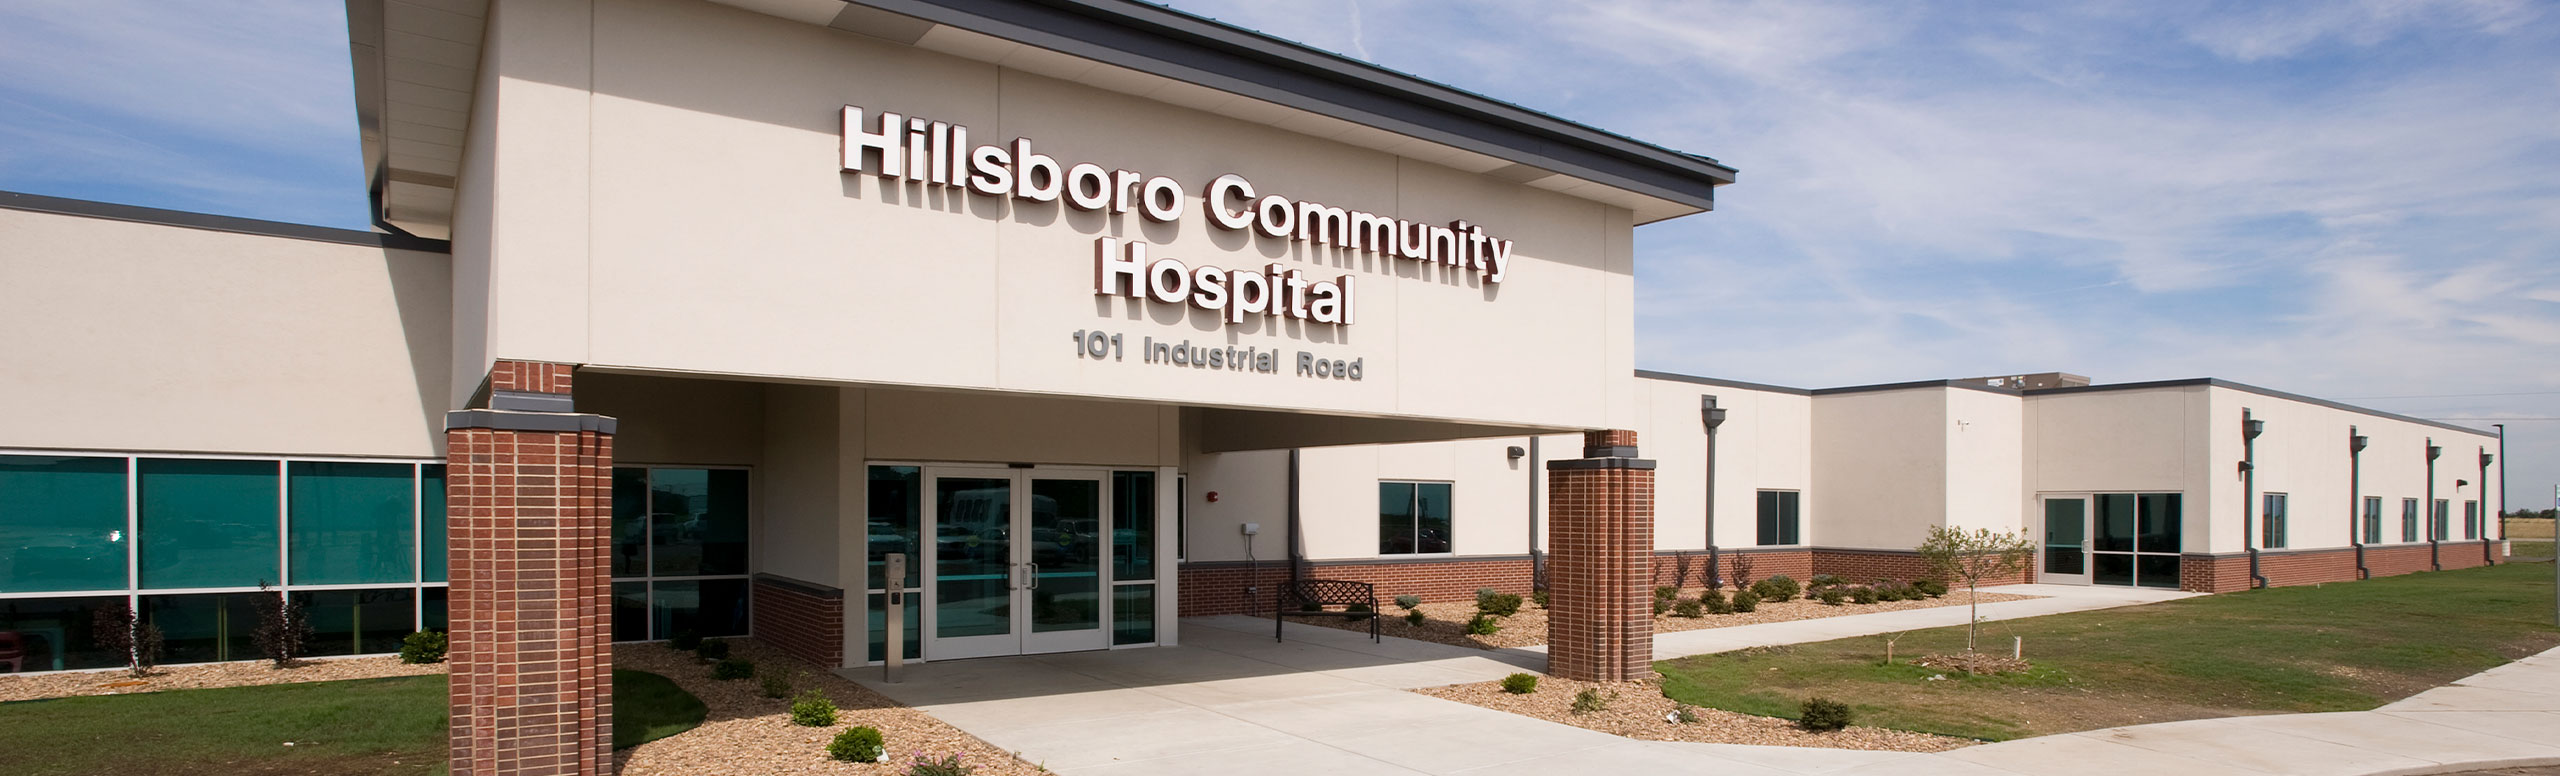 Banner picture of Hillsboro Community Hospital front entrance during the day time.